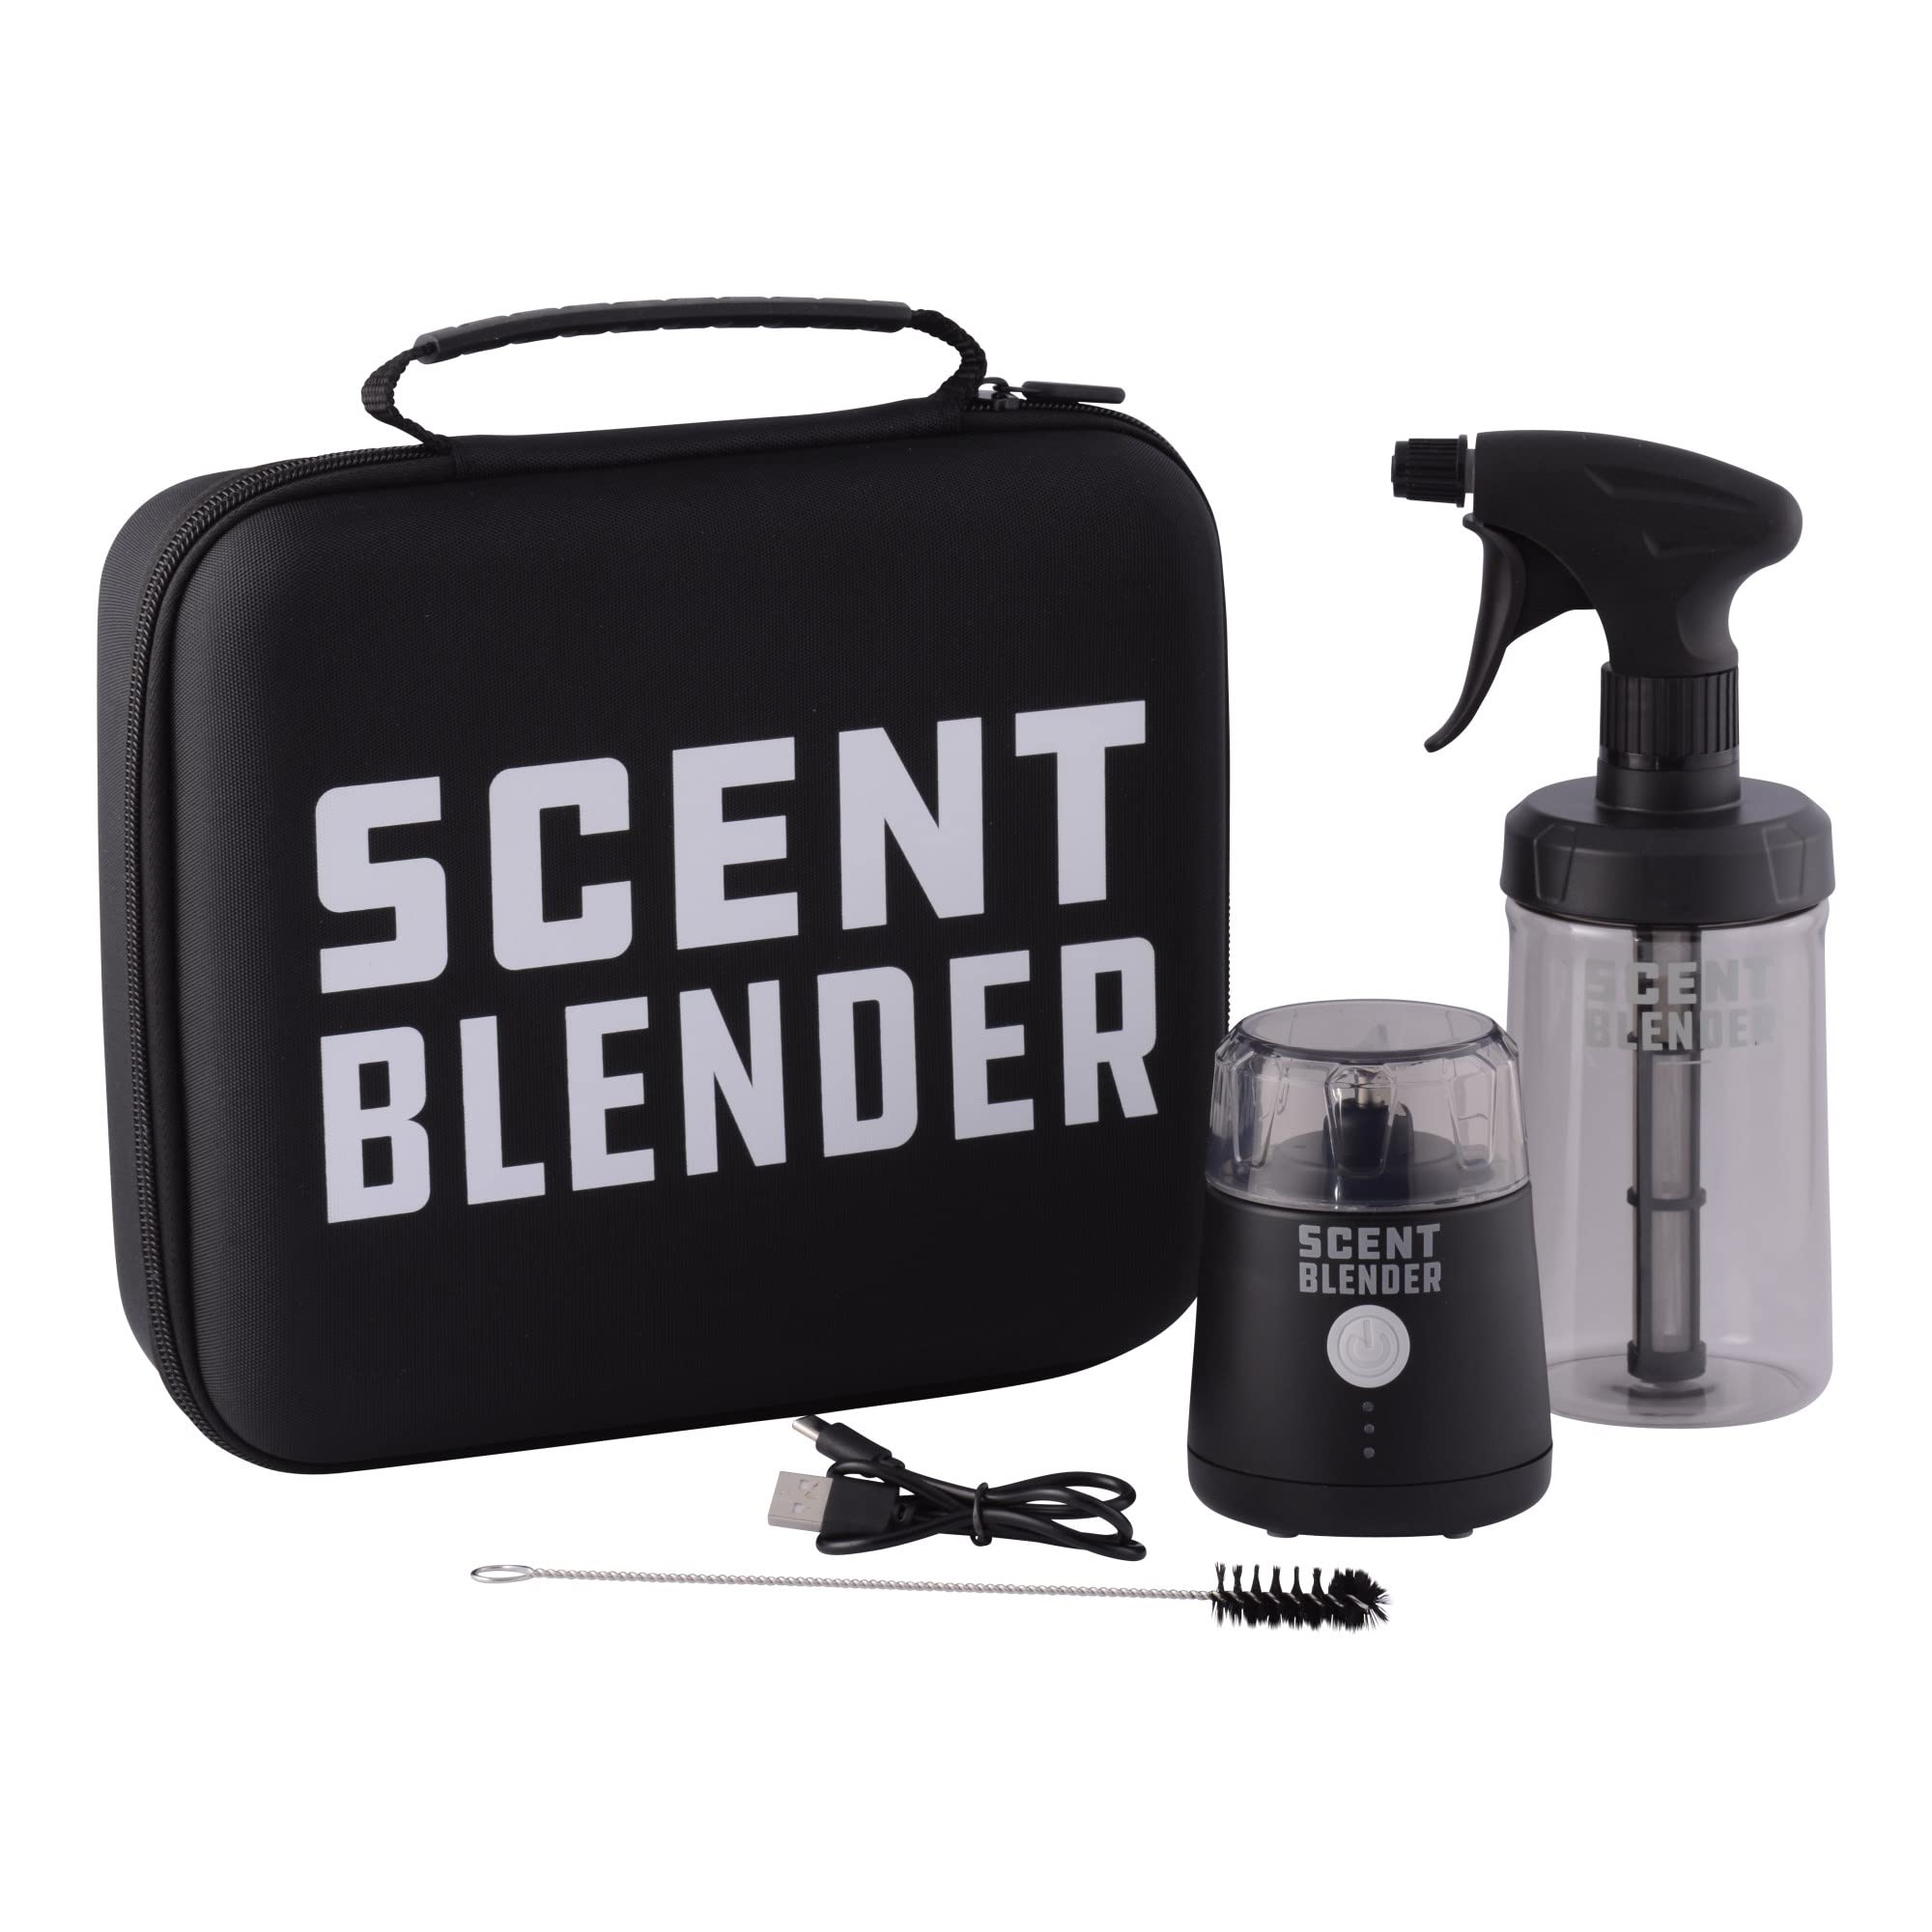 Blender accessories, Product accessories